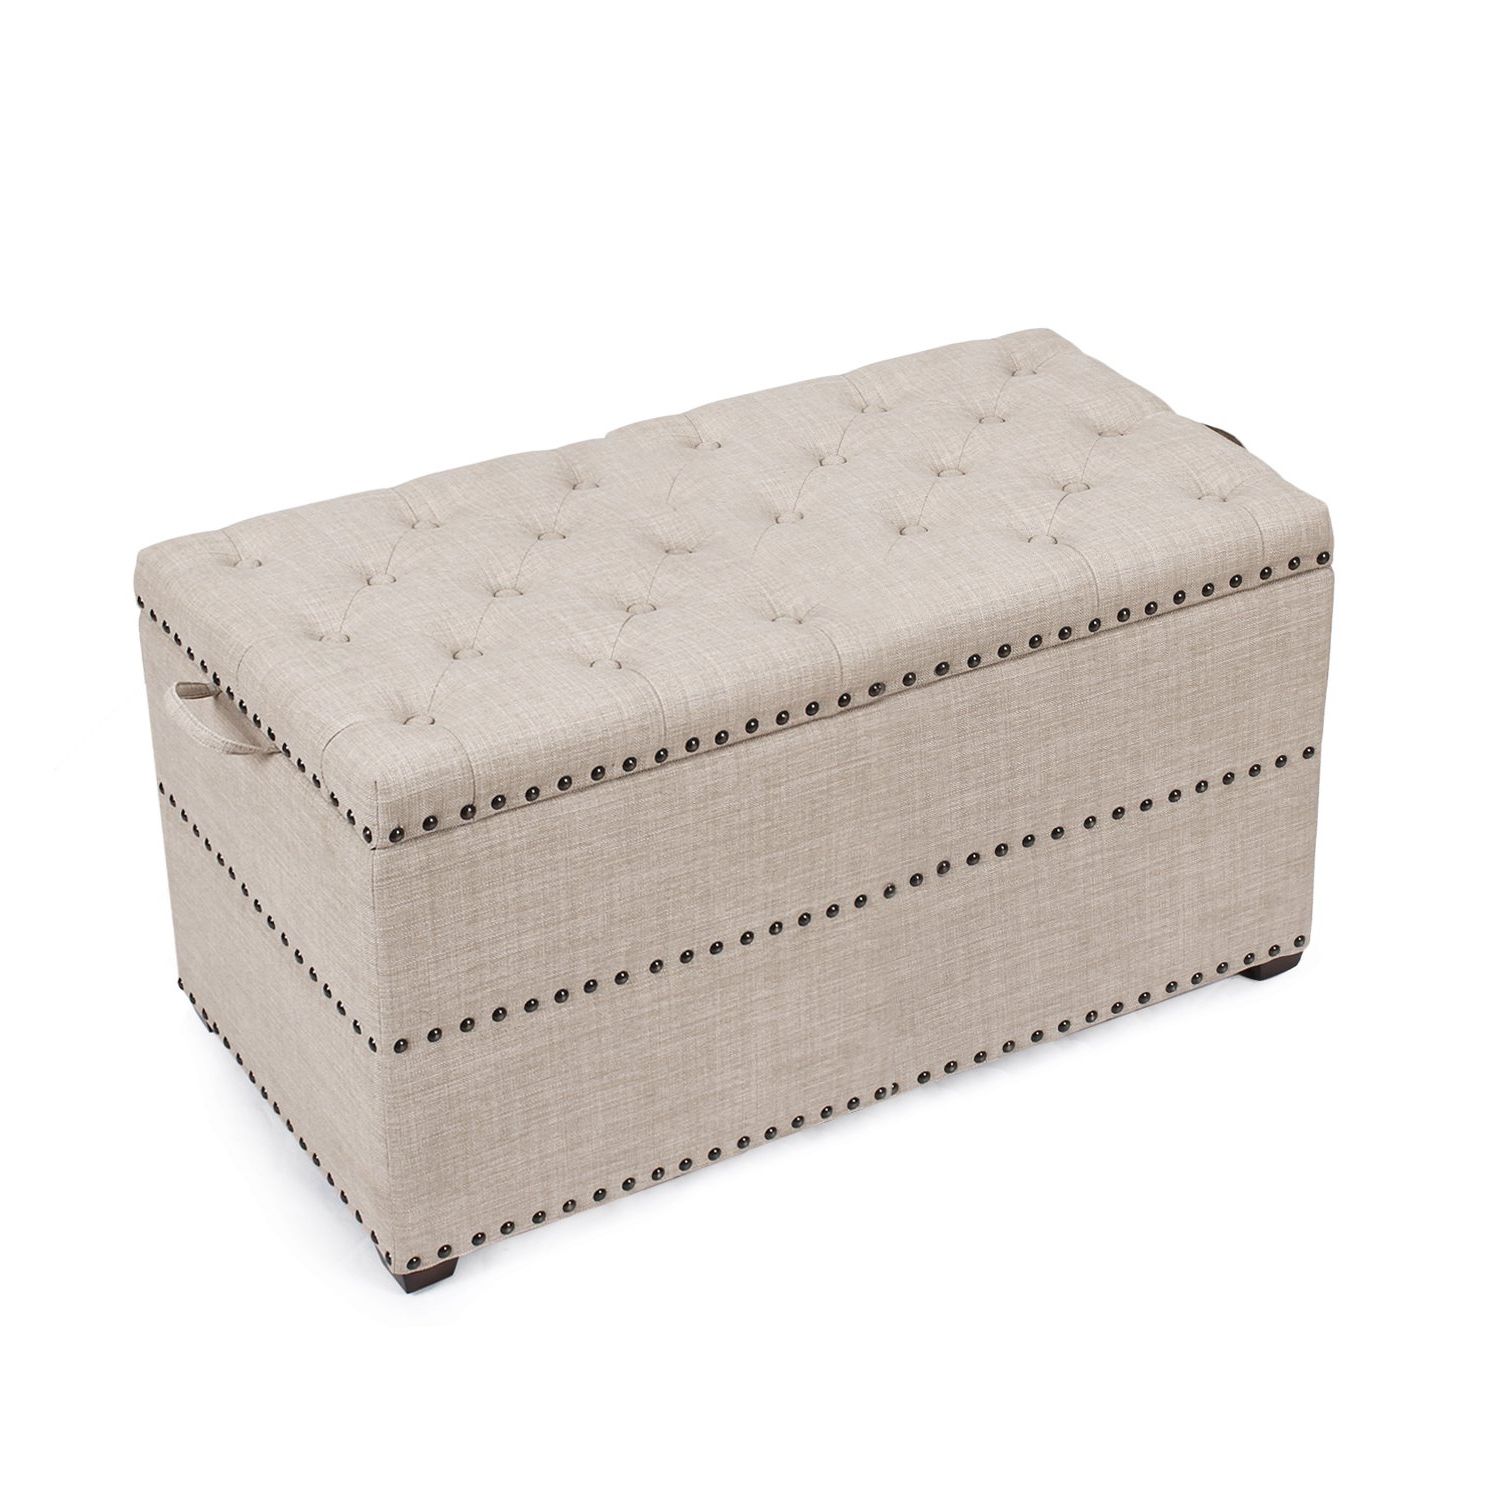 18 Inch Ottomans Within Newest Amazon: Asense 18 Inch Height Fabric Rectangle Tufted Lift Top Storage  Ottoman Bench, Footstool With Solid Wood Legs : Home & Kitchen (View 8 of 10)